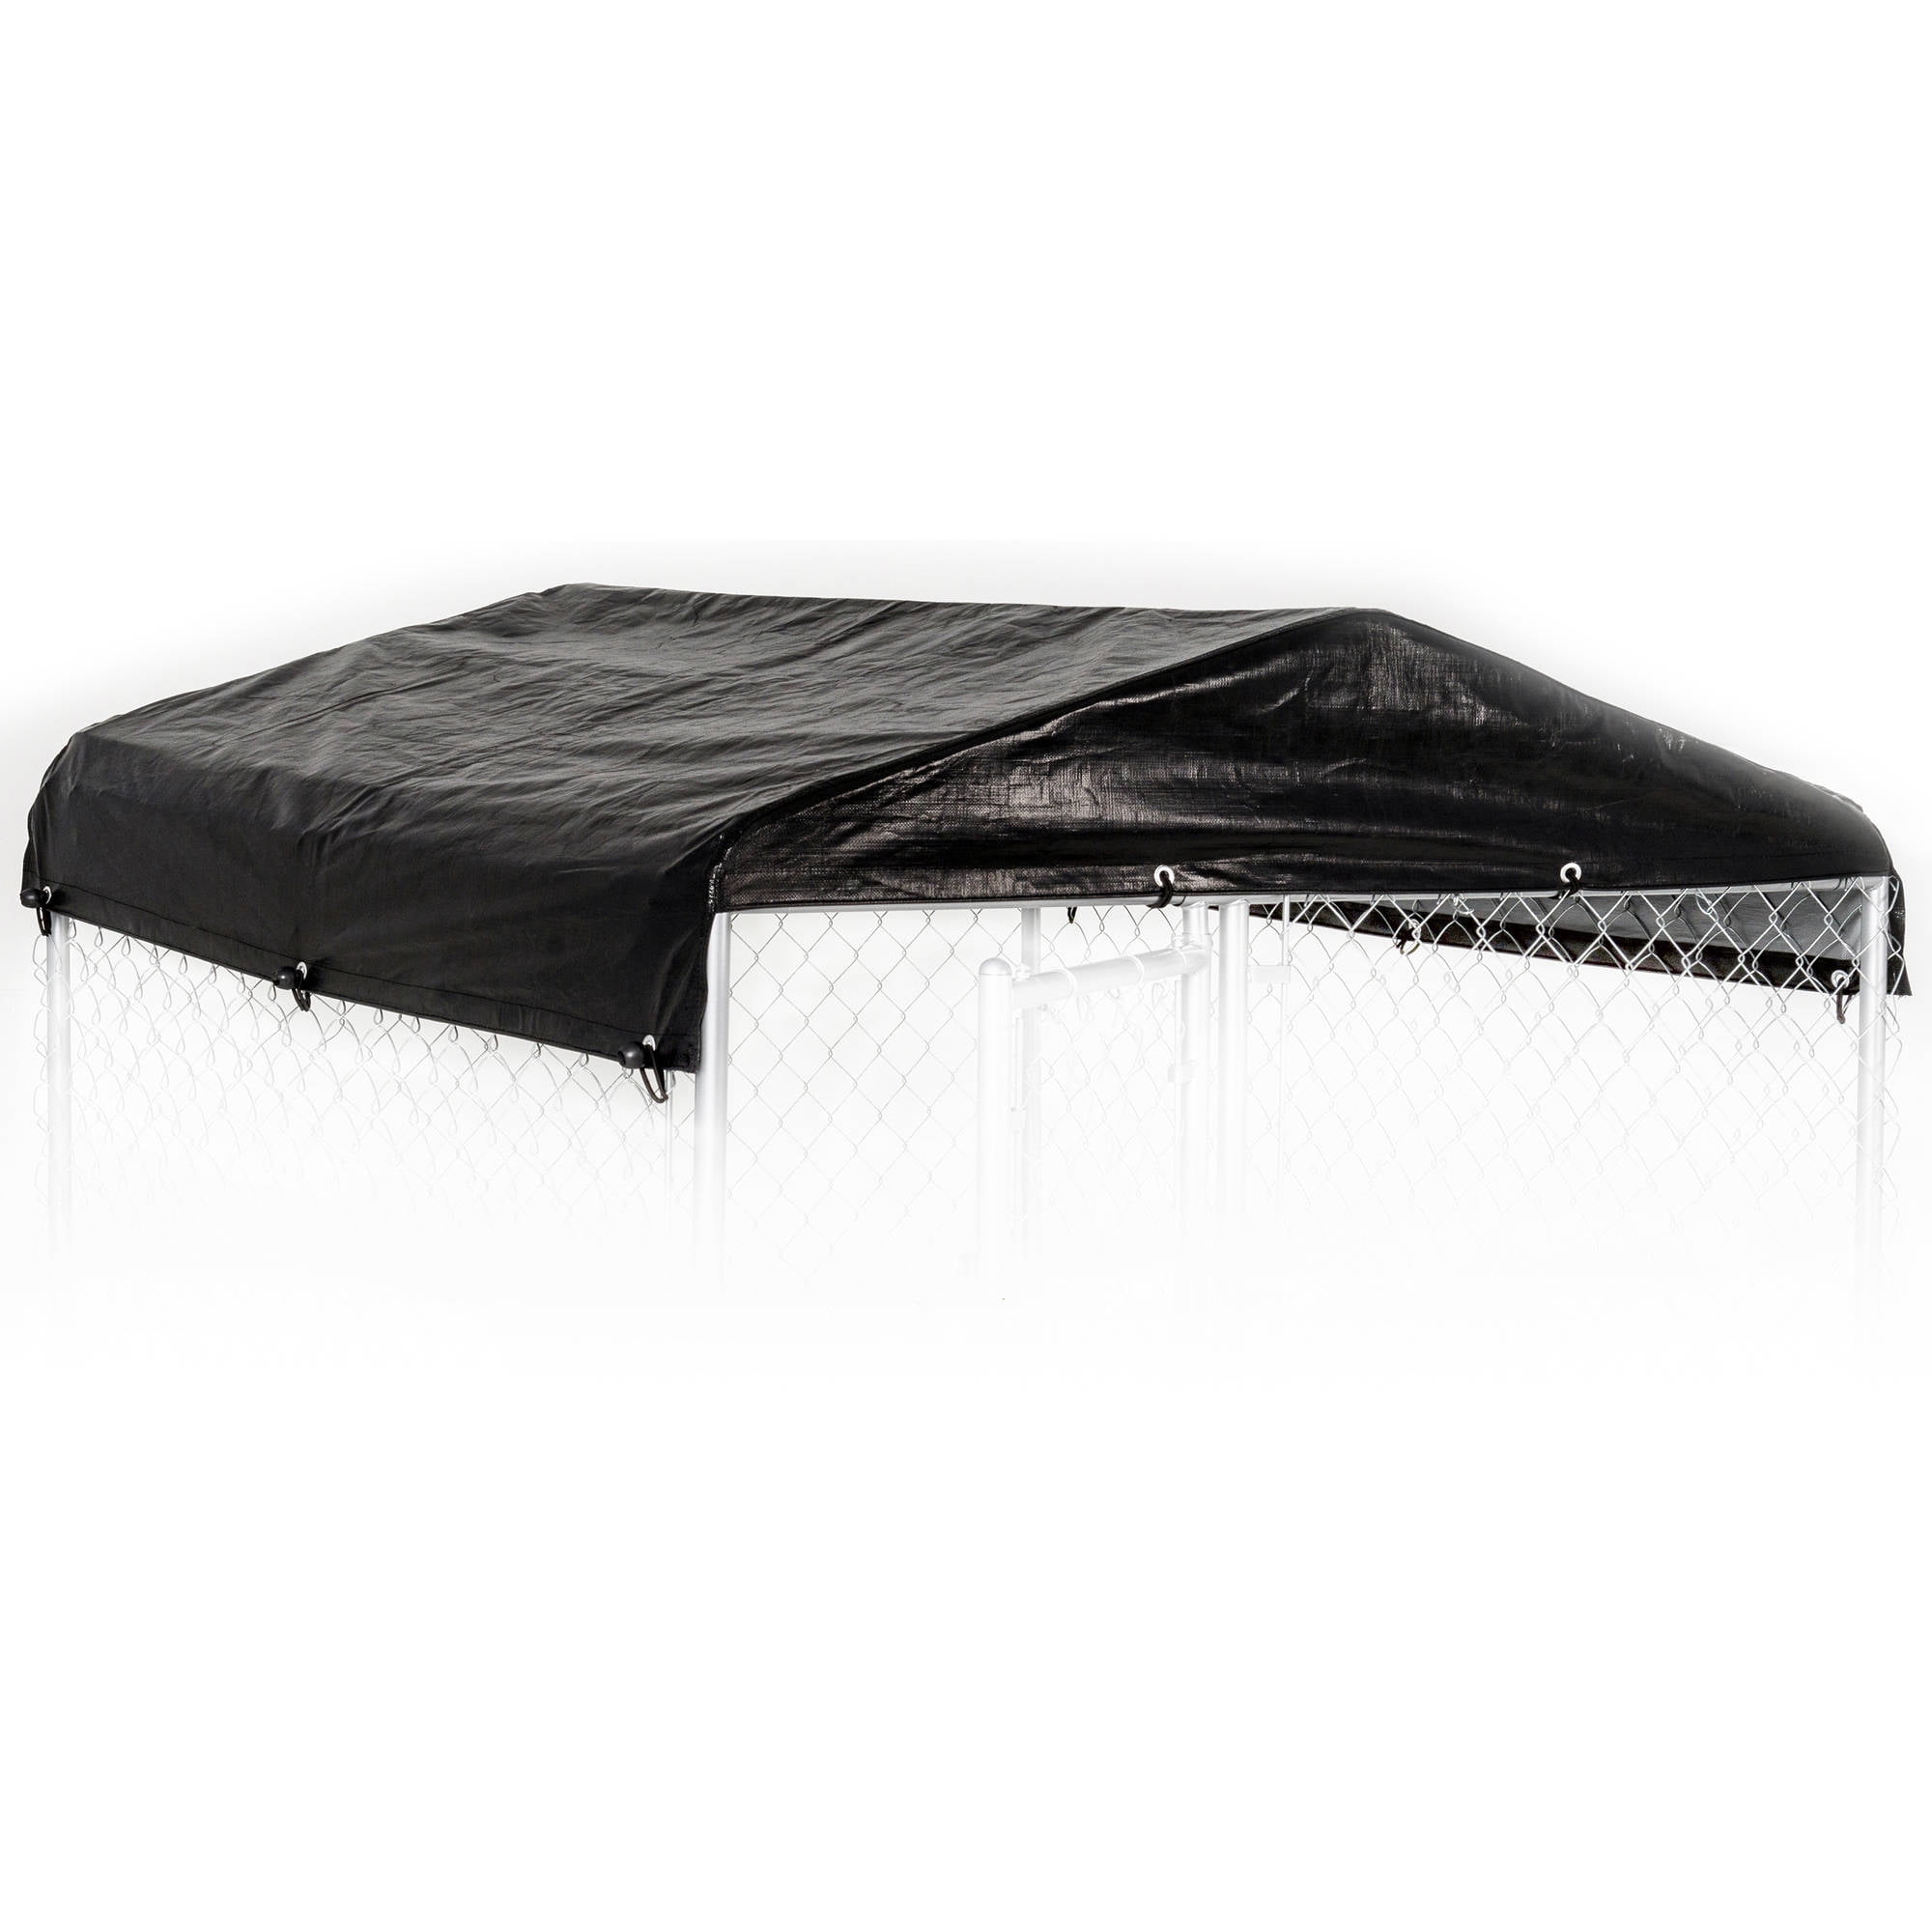 outdoor dog kennel cover